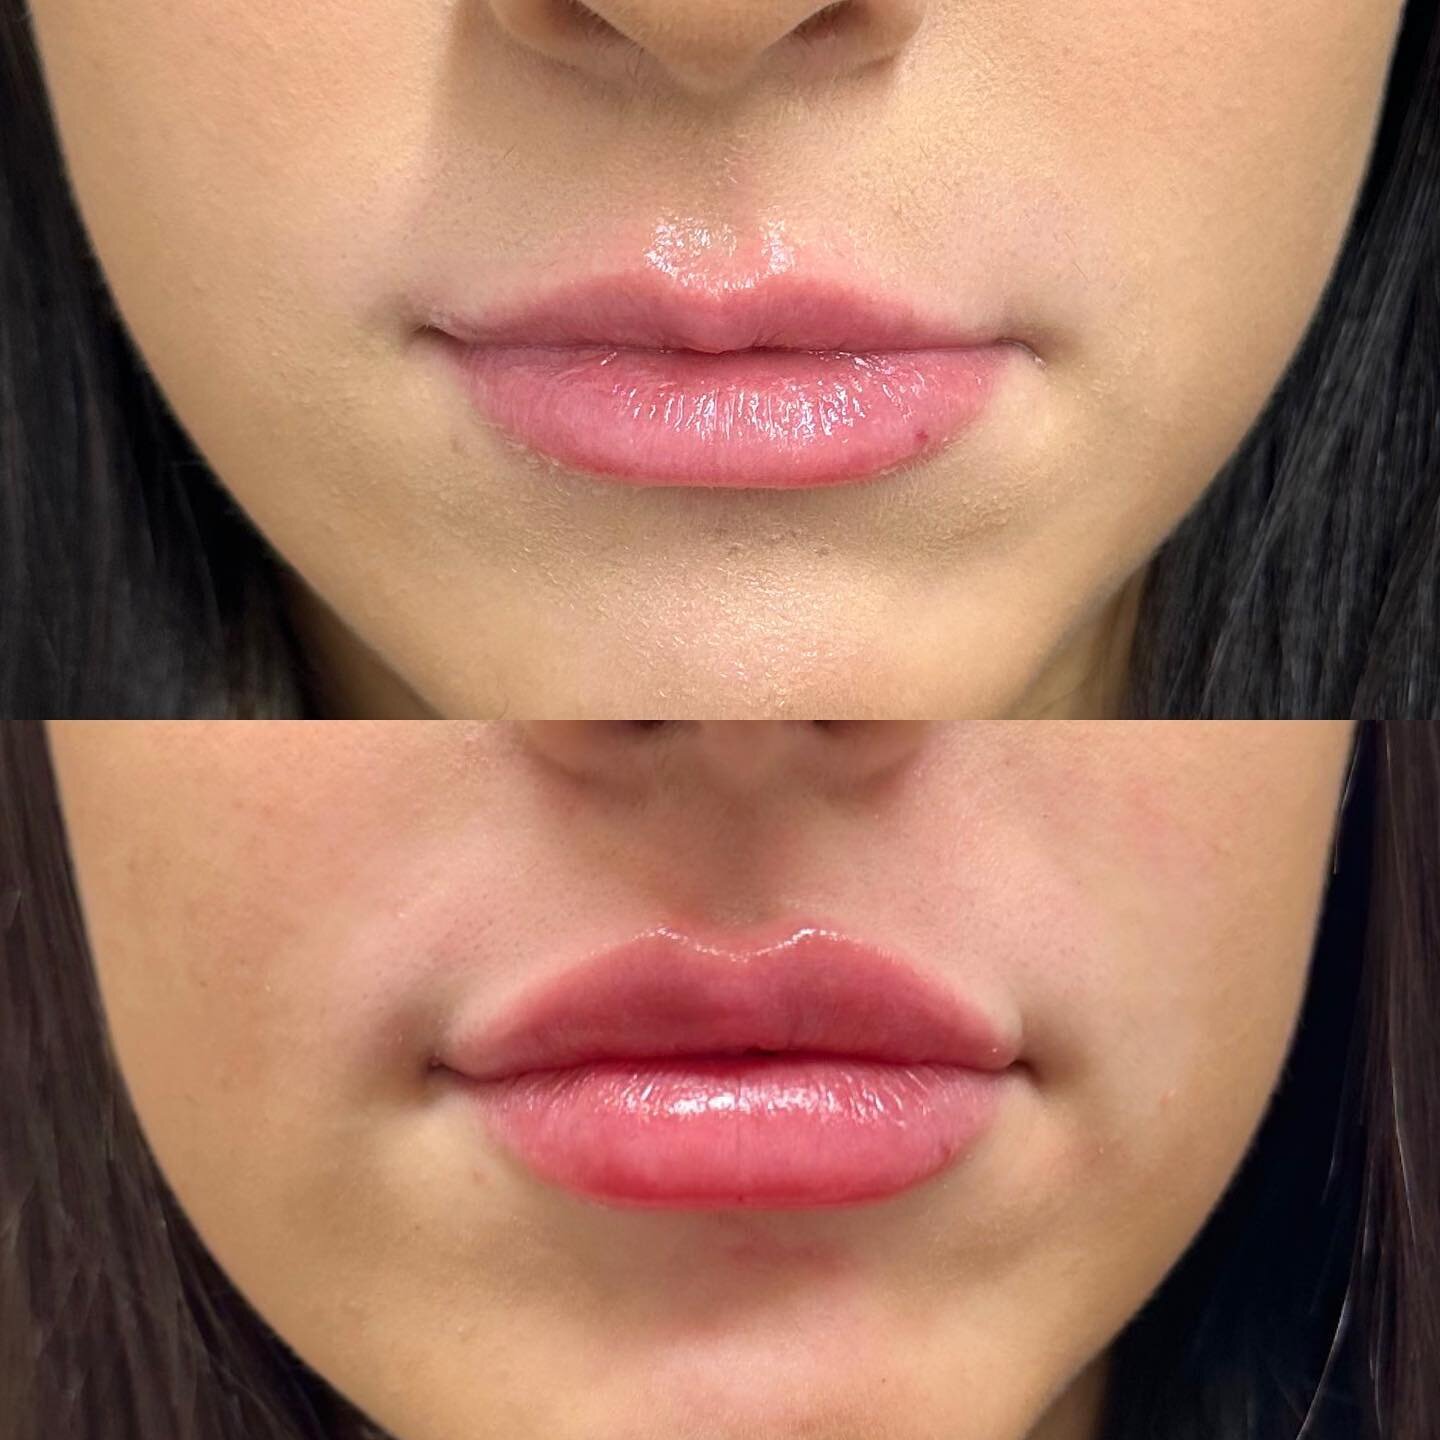 Balance ✨

So often my clients main concern is their smaller top lip. 

Dermal fillers are perfect to balance out the lips and tweak any little irregularities between them. 

Photos immediately before and after 🤎